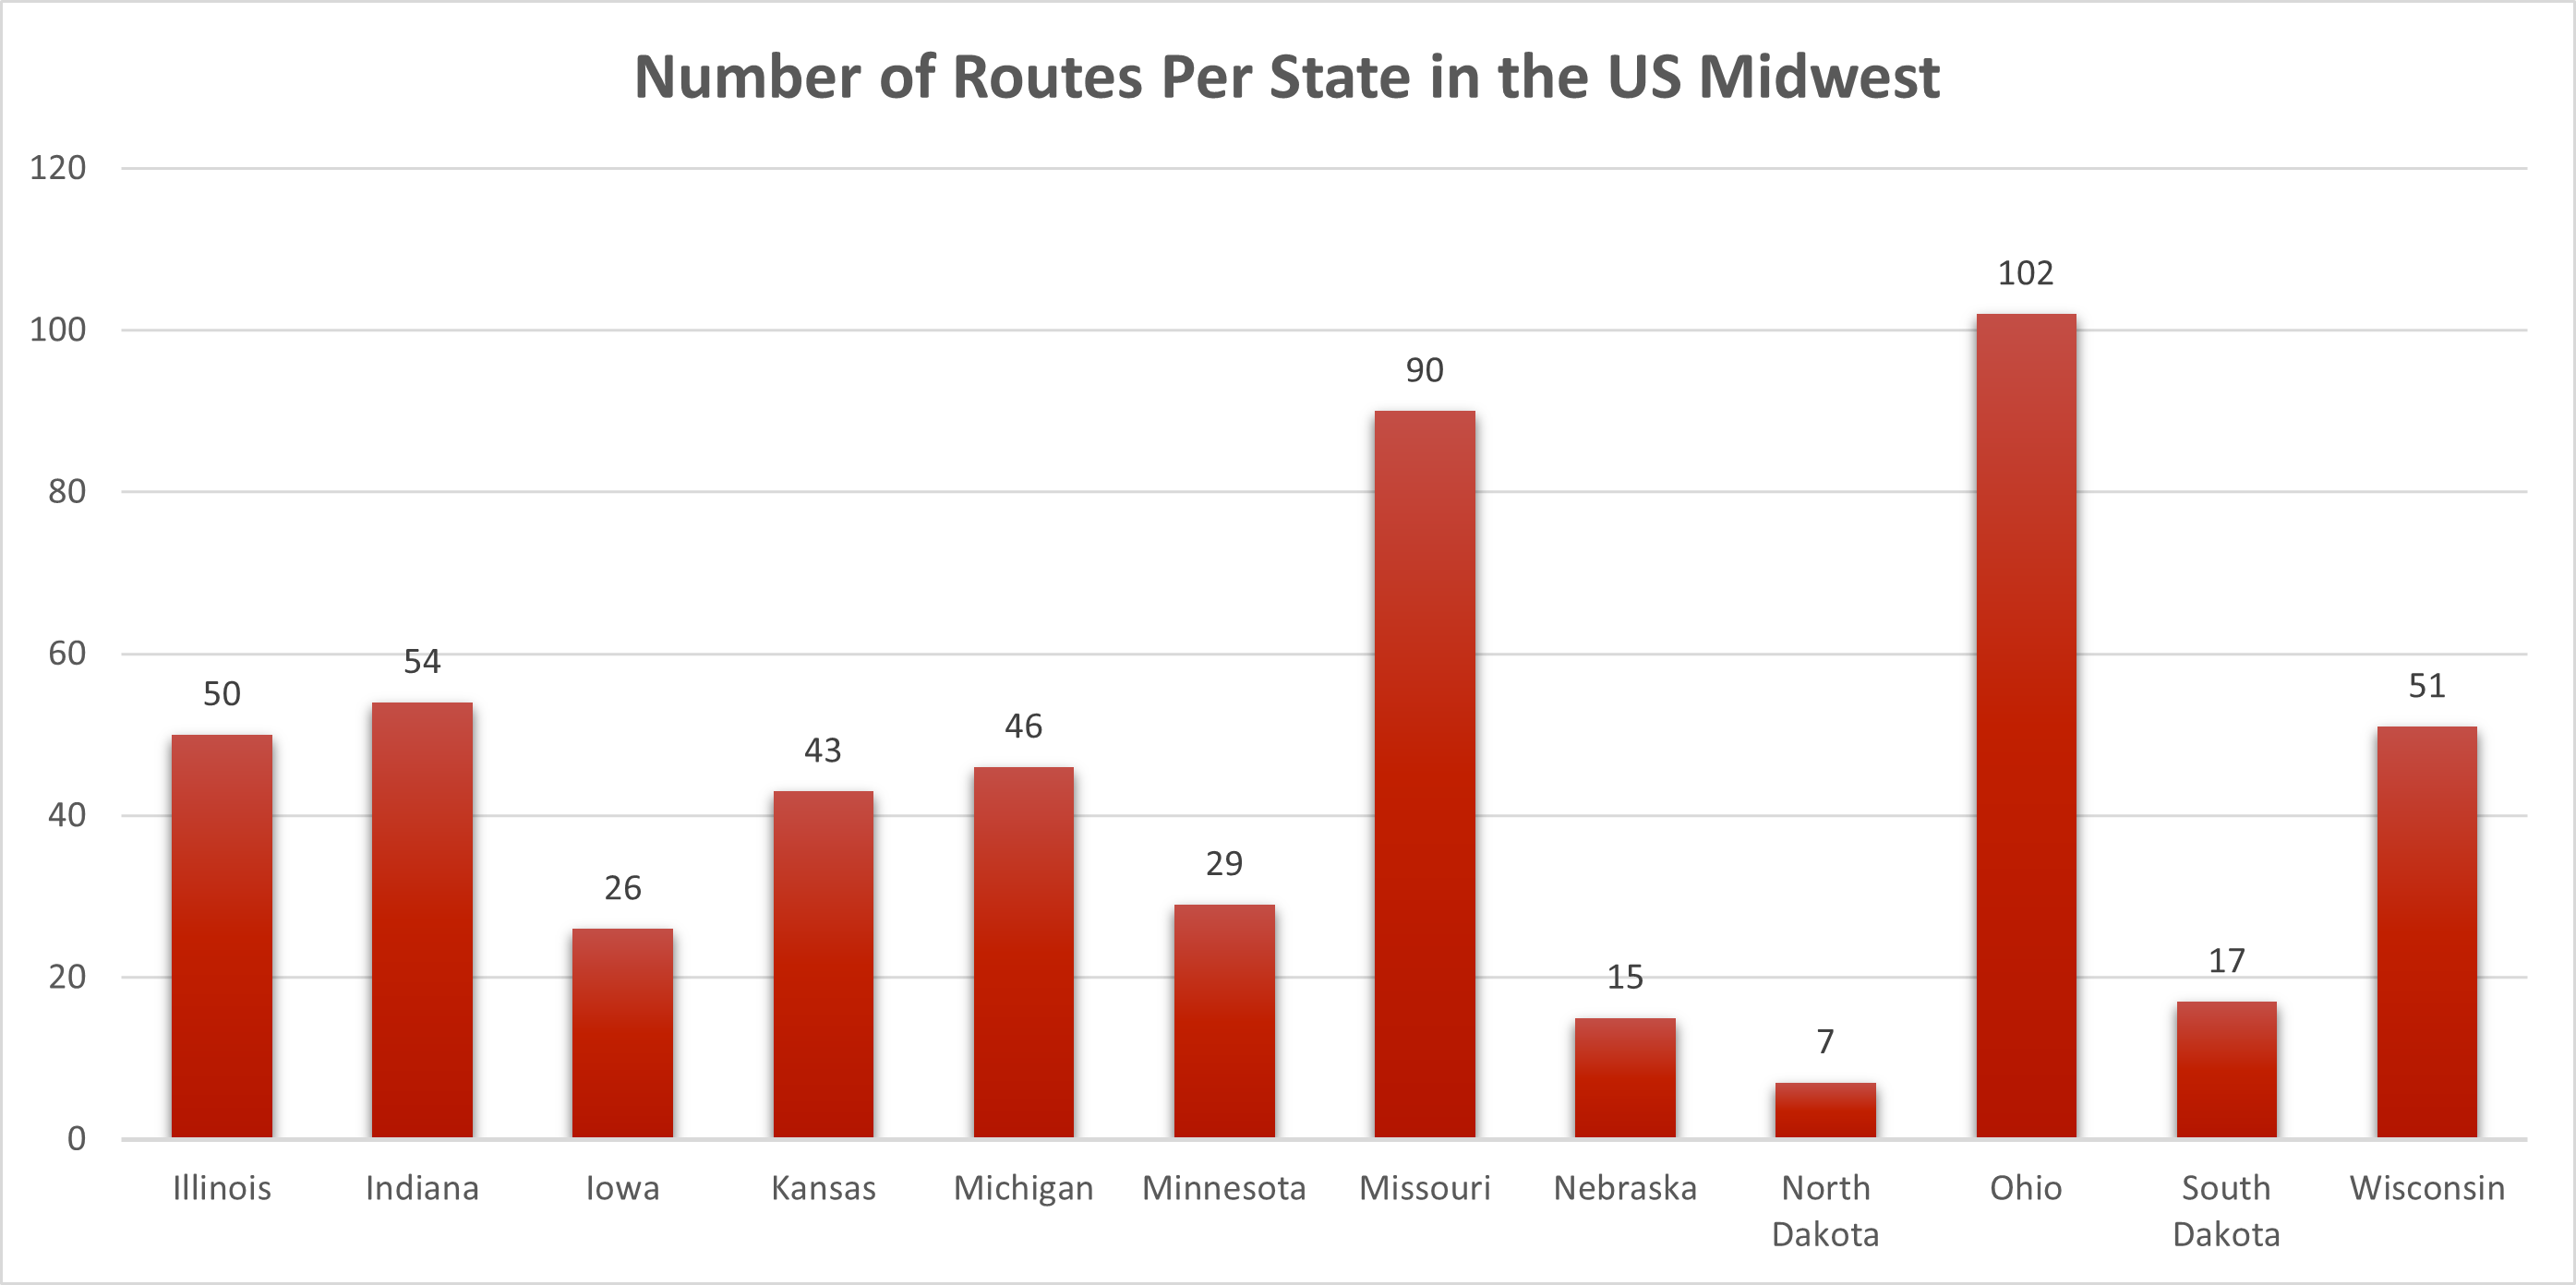 Number of registered motorcycle roads in the midwest region